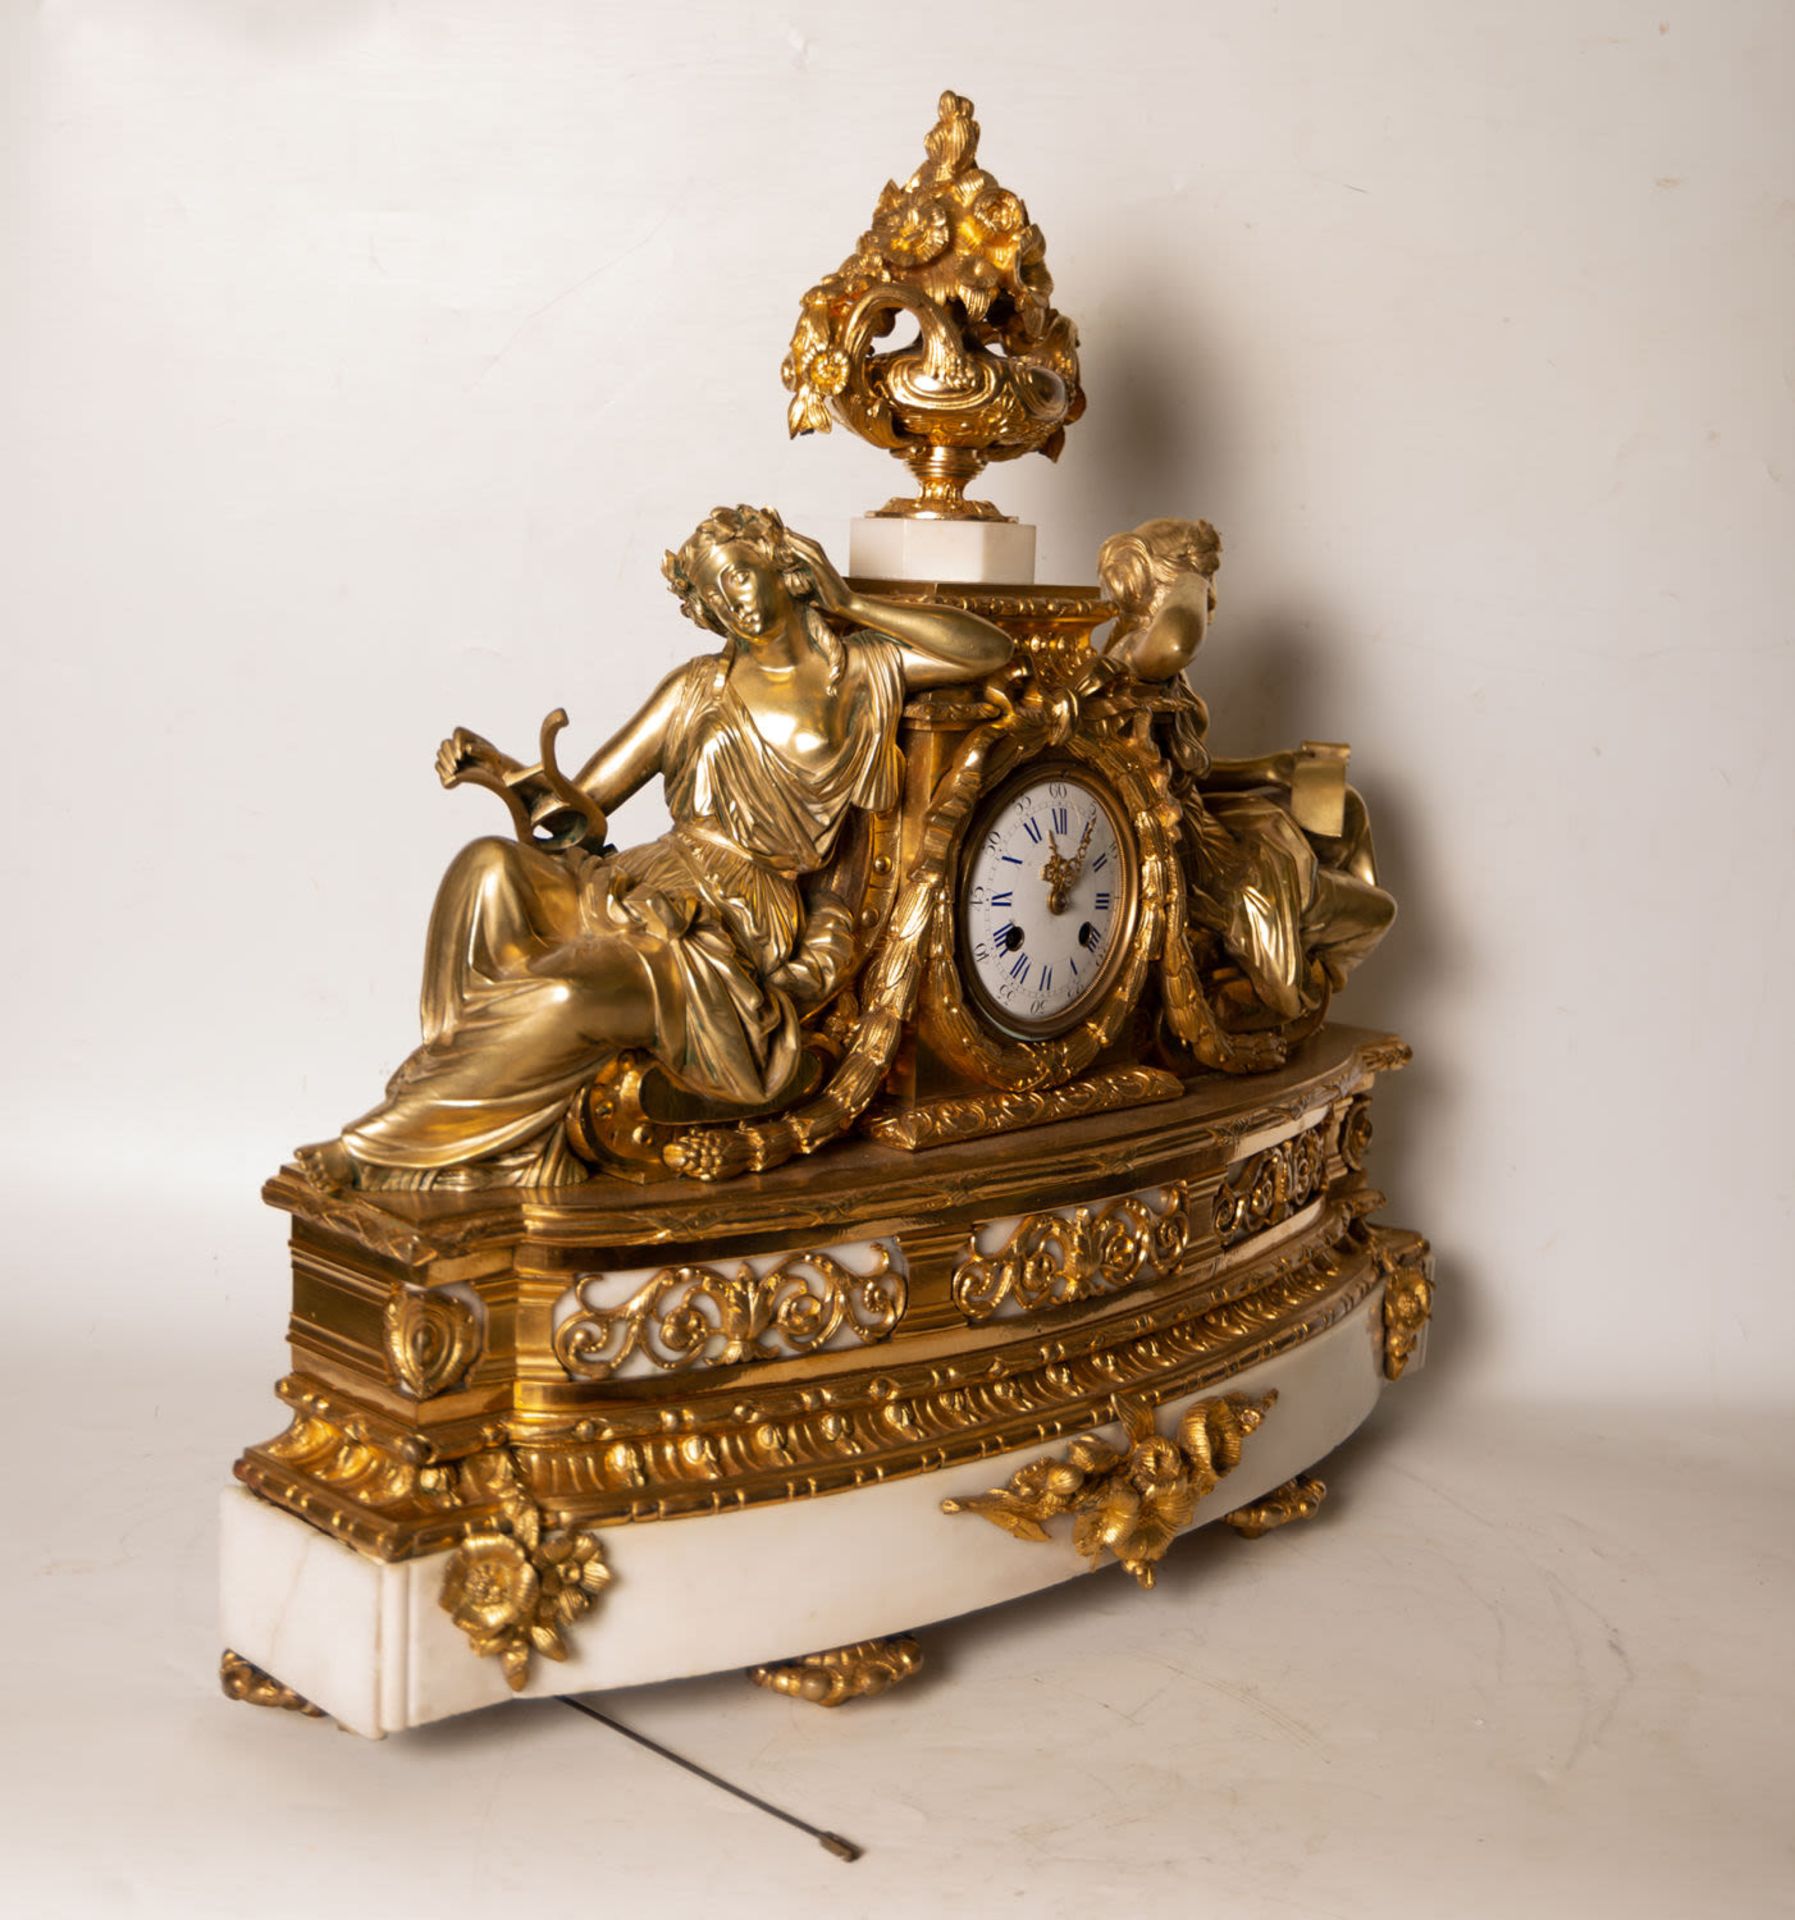 Large three-piece Garniture clock with pair of cherub candlesticks in Marble and gilt bronze, France - Image 5 of 11